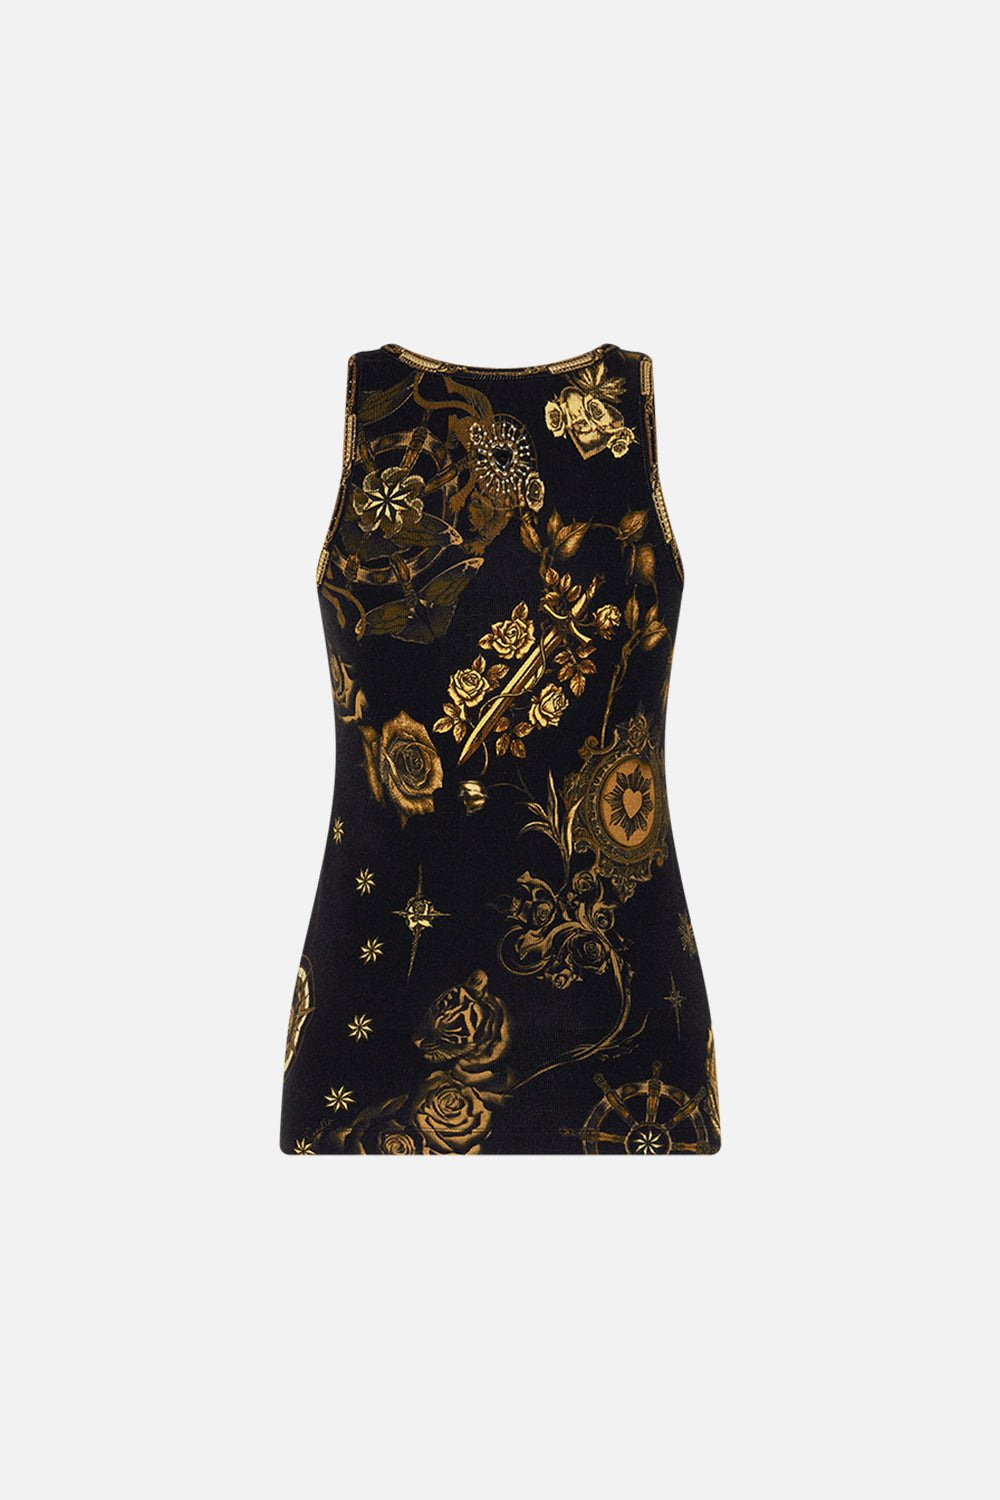 CAMILLA black jersey scoop neck tank top in So Says The Oracle print.